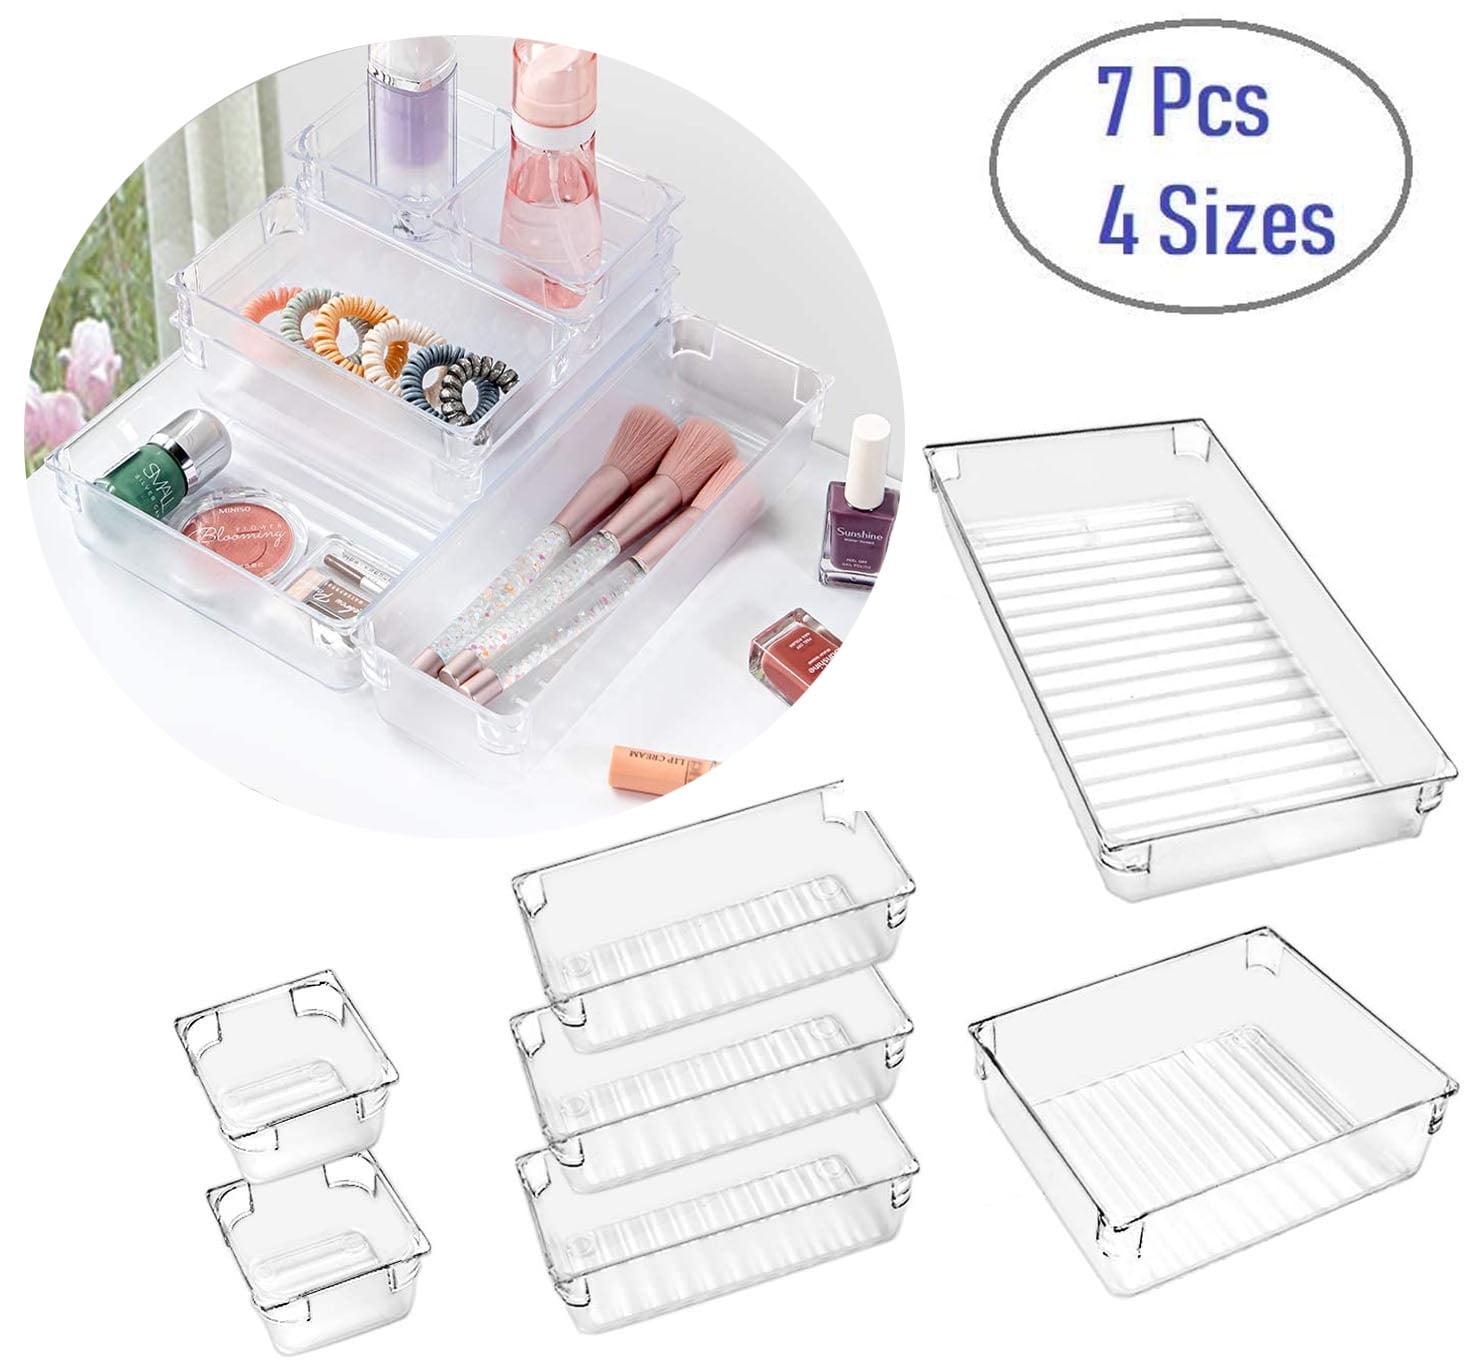 Chris.W Desk Drawer Organizer Tray with Adjustable Dividers, Multi-Drawers  for Makeups, Utensil, Pens, Flatware and Junks - Set of 4 (2 Large + 2